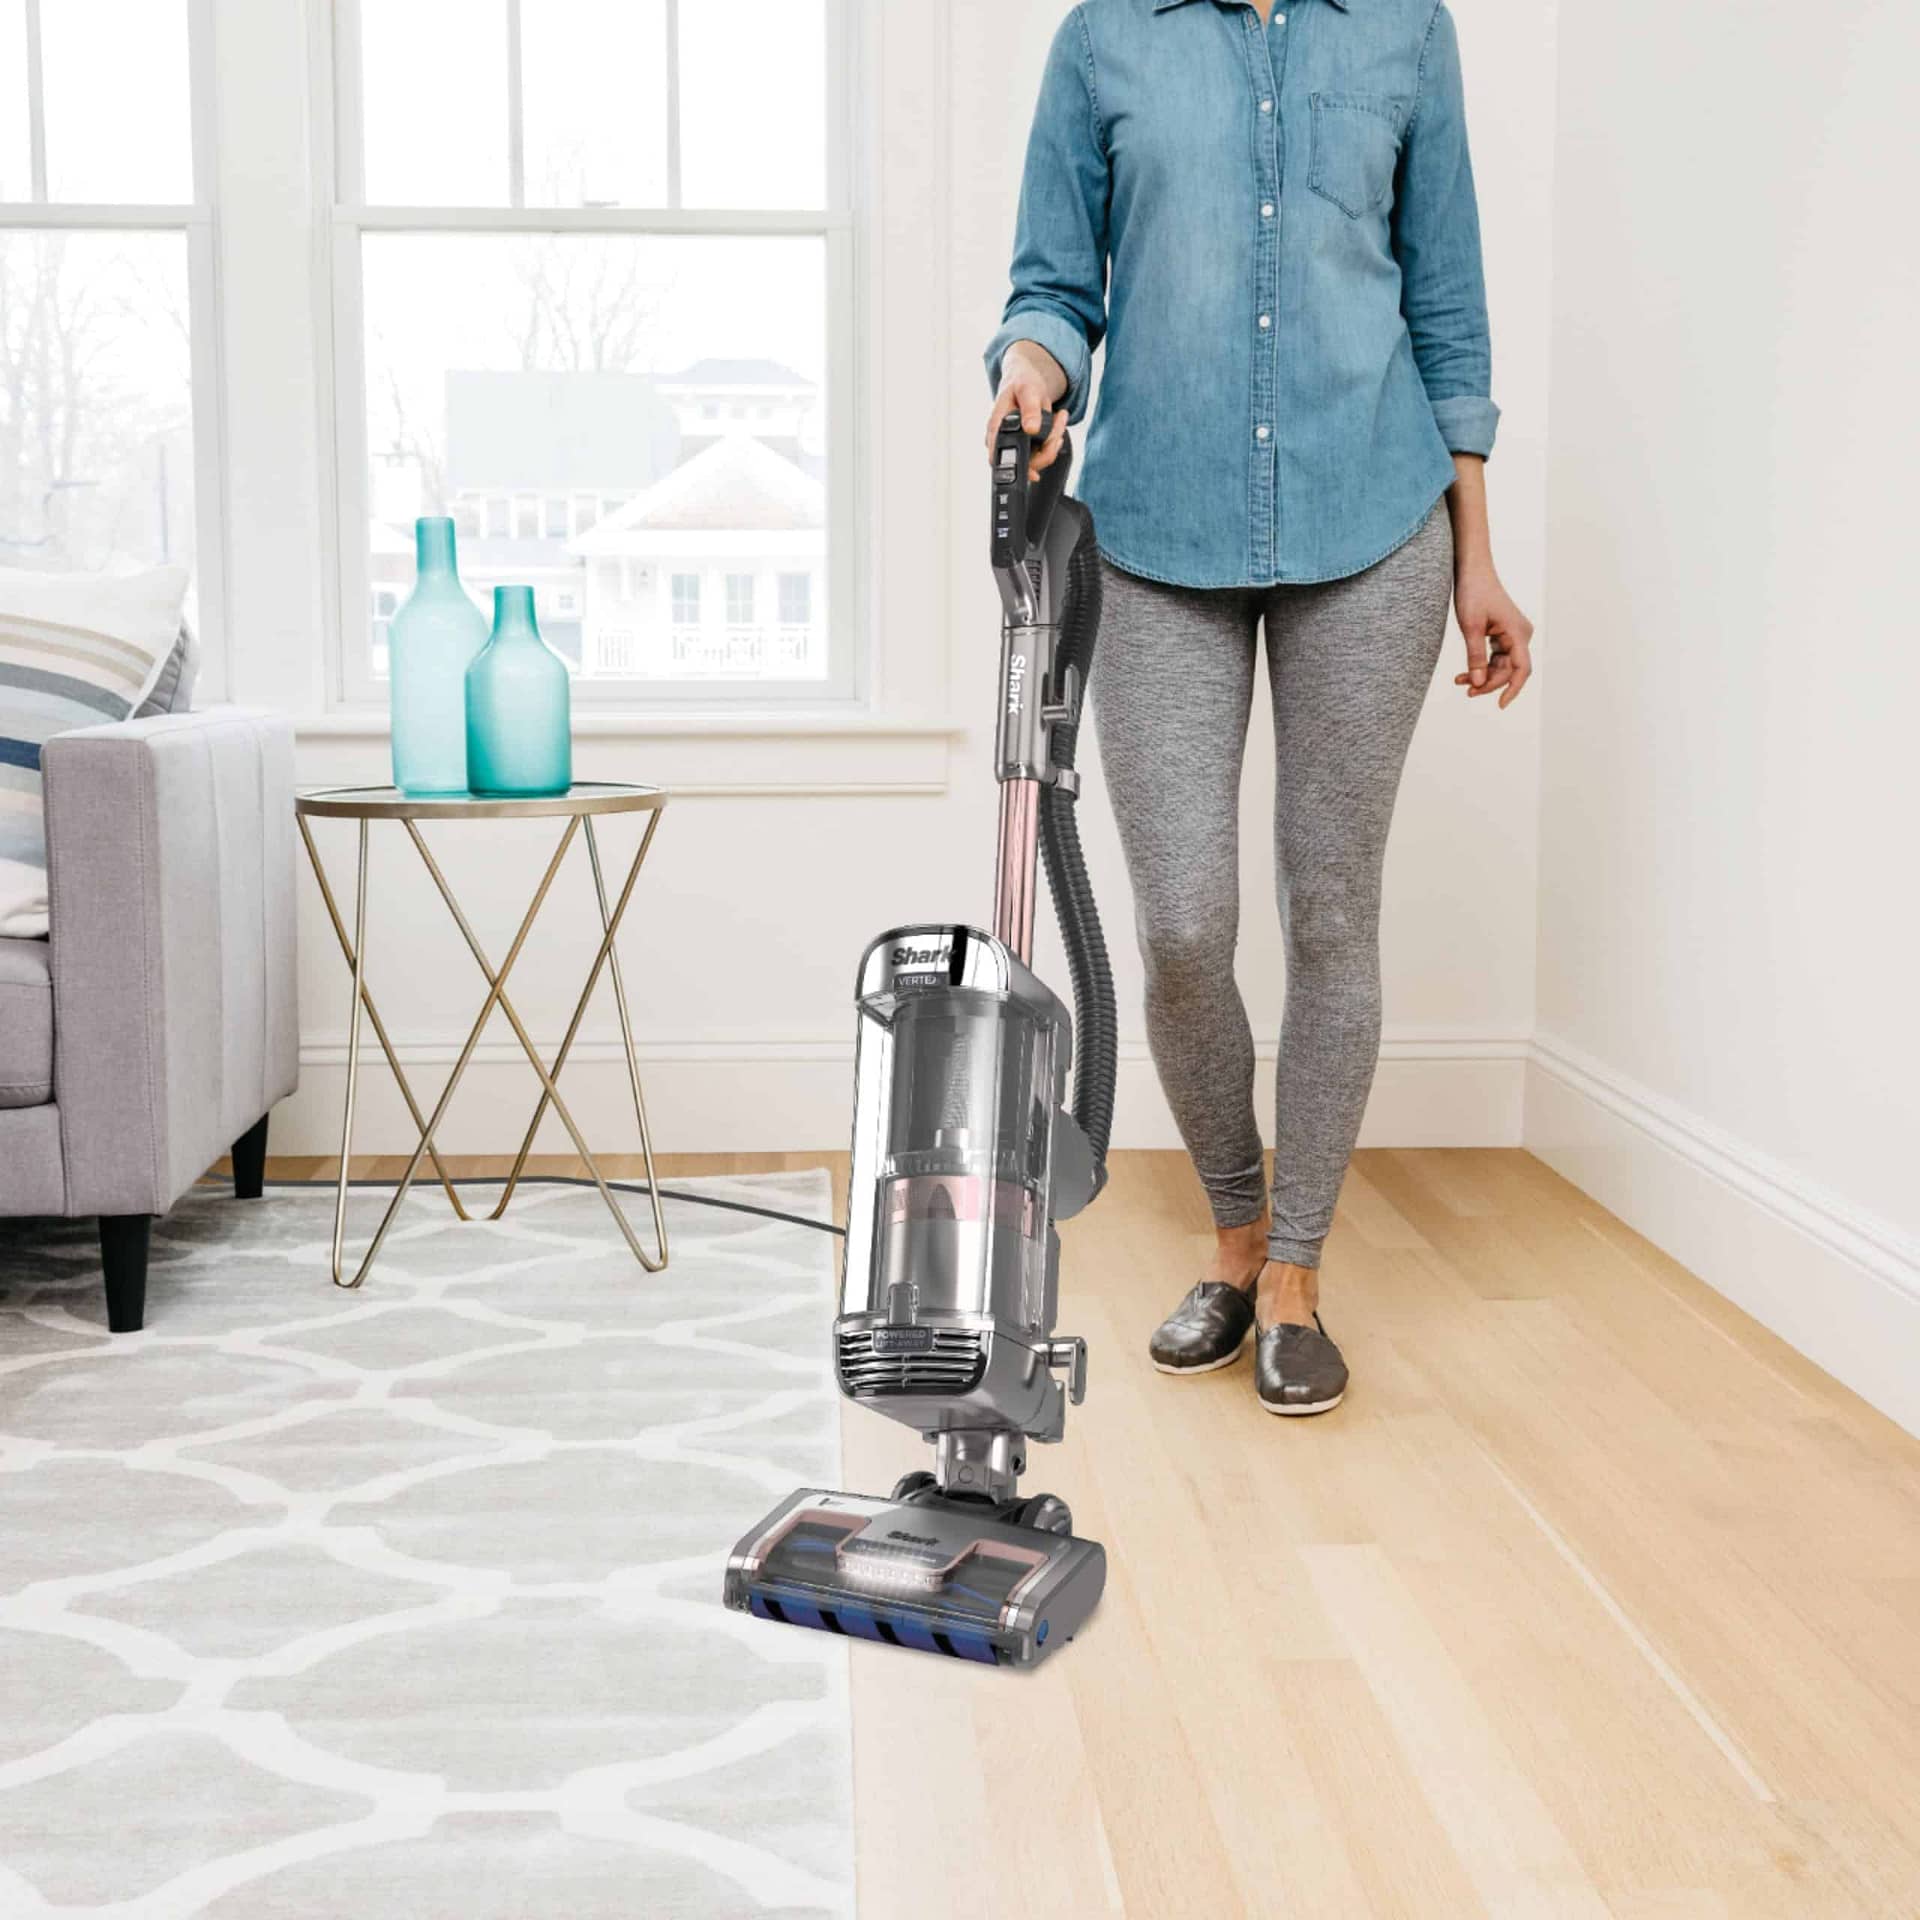 Shark Vacuum Brush Not Spinning: 7 Easy Ways To Fix It Now